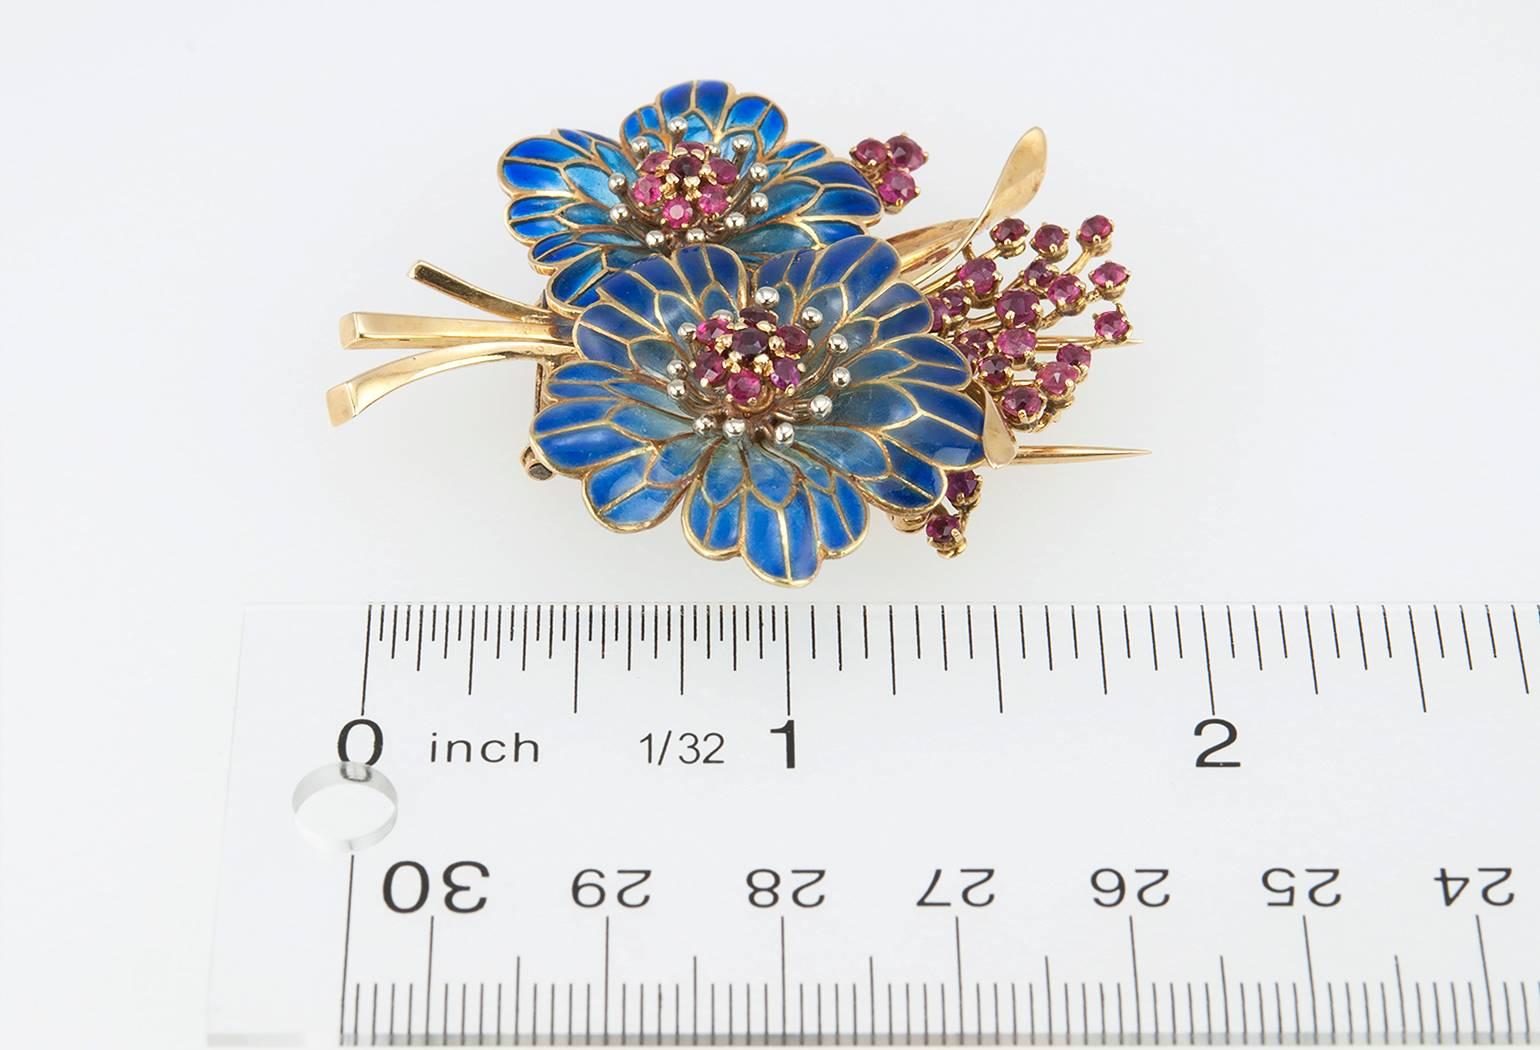 A beautiful floral plique-à-jour brooch in 18 karat yellow gold with 36 round rubies. Circa 1960s with French hallmarks.

Brooch measures approximately 2.02 inches in length, 1.88 inches in width, 0.45 inches in depth.